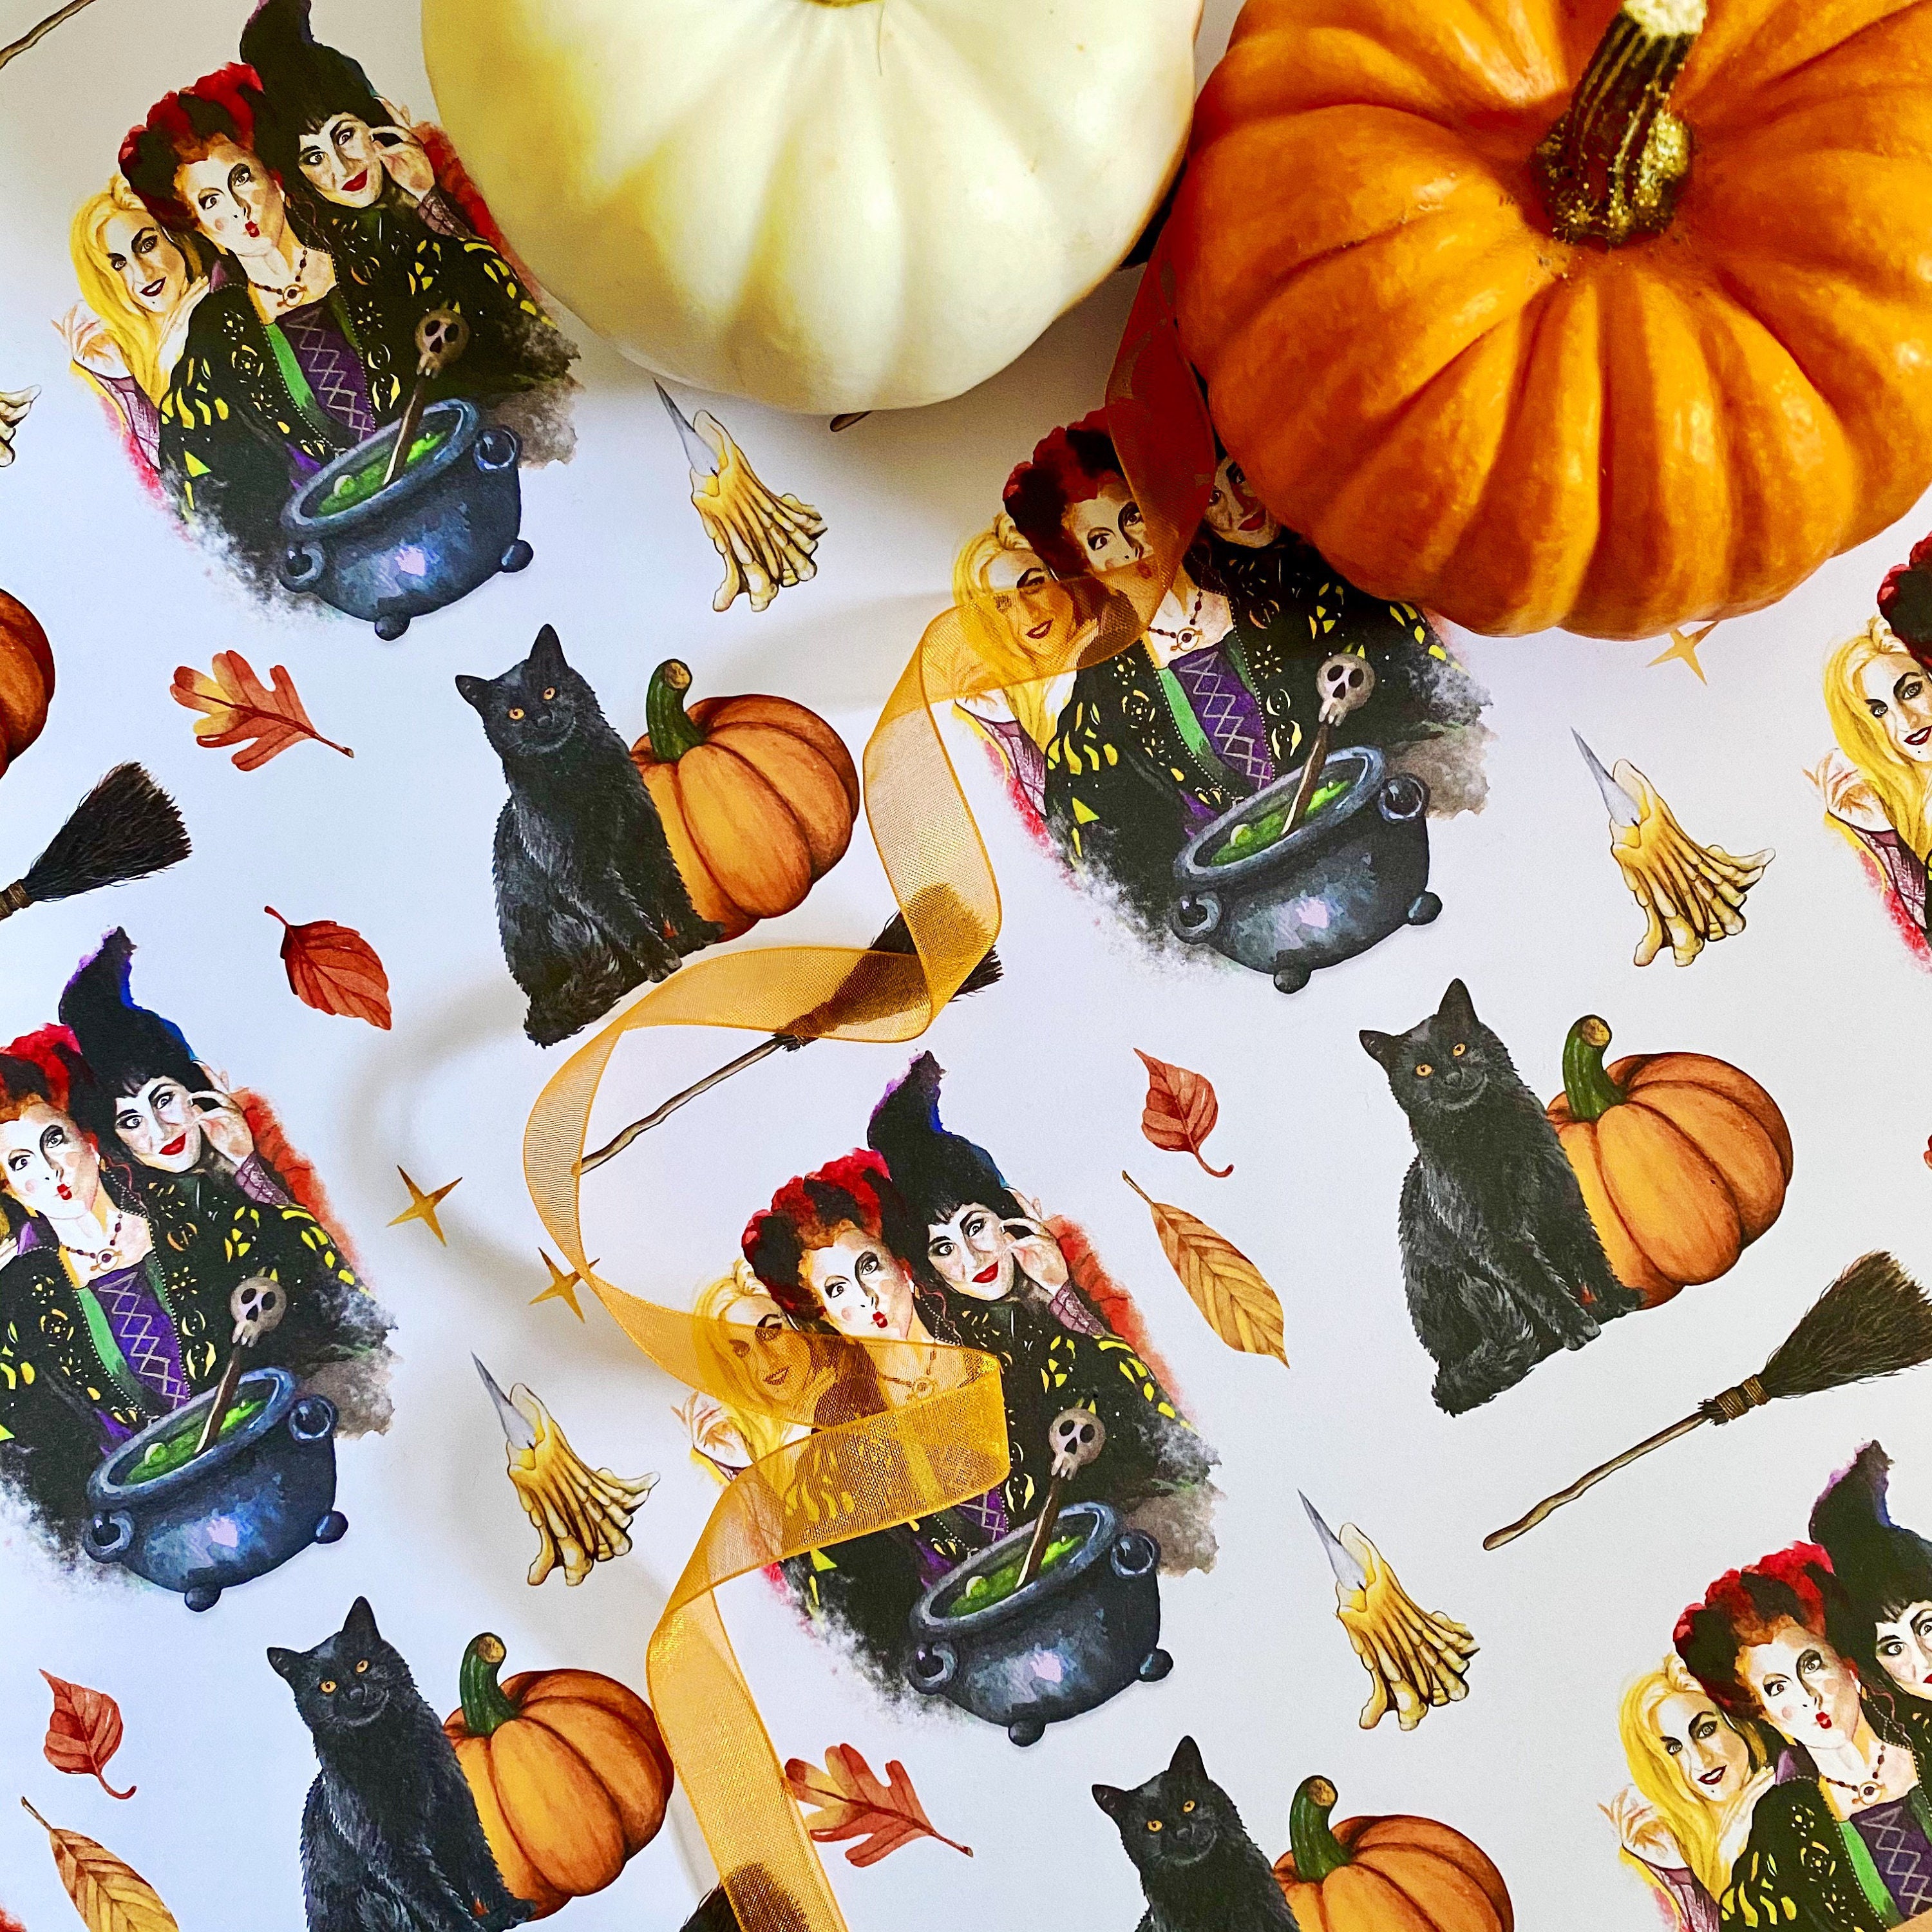 Hocus Pocus, The Sanderson Sisters, Watercolour, Halloween Wrapping Paper